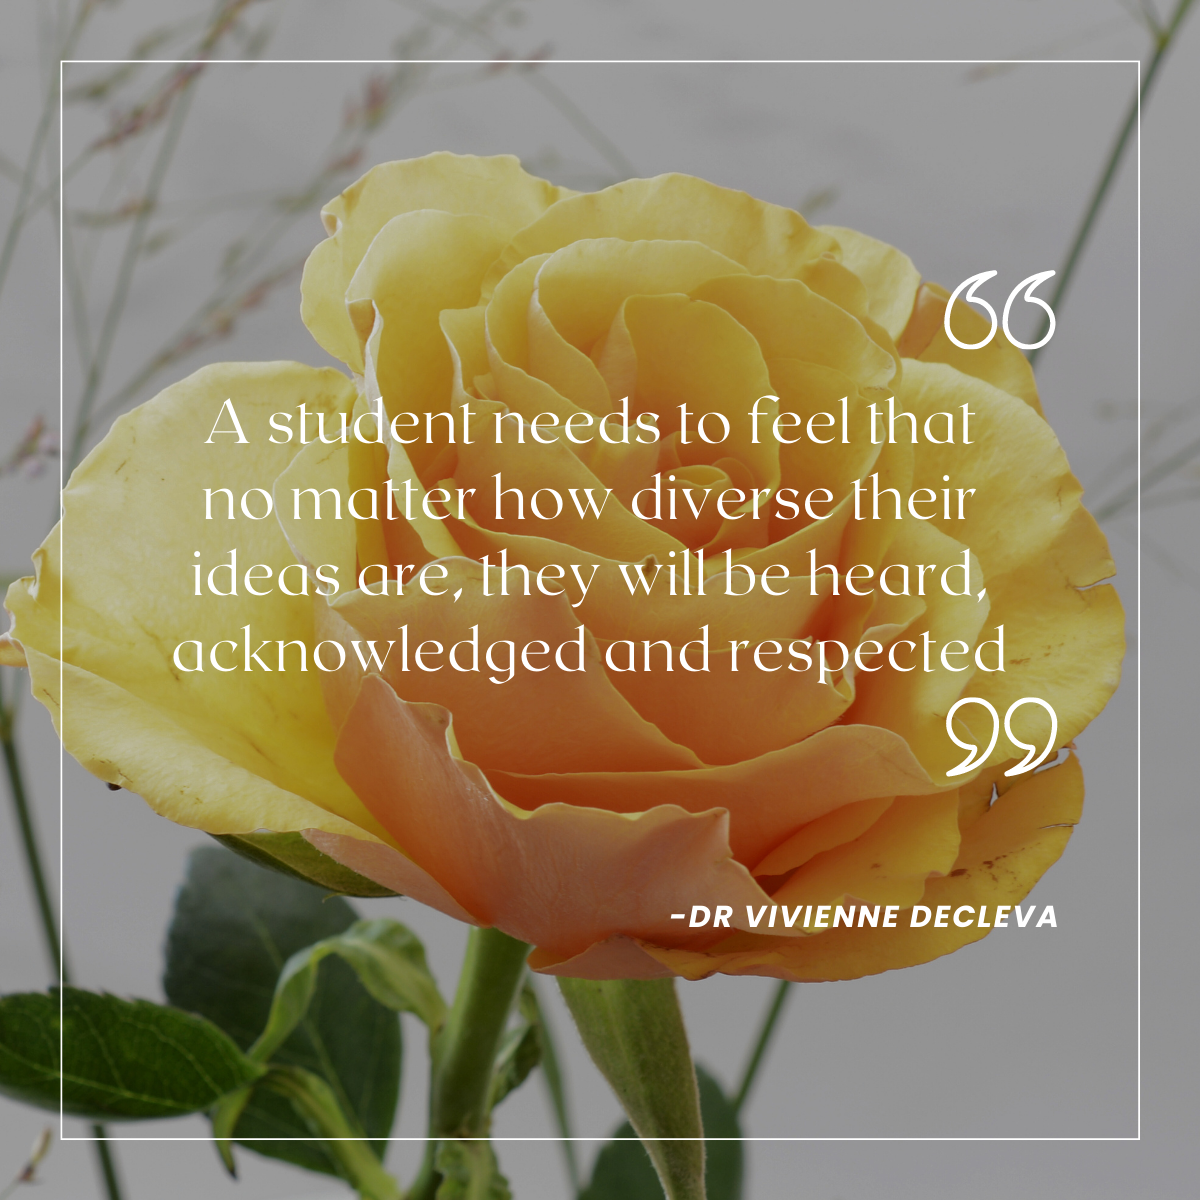 A student needs to feel that no matter how diverse their ideas are, they will be heard, acknowledged and respected" - Dr Vivienne Decleva